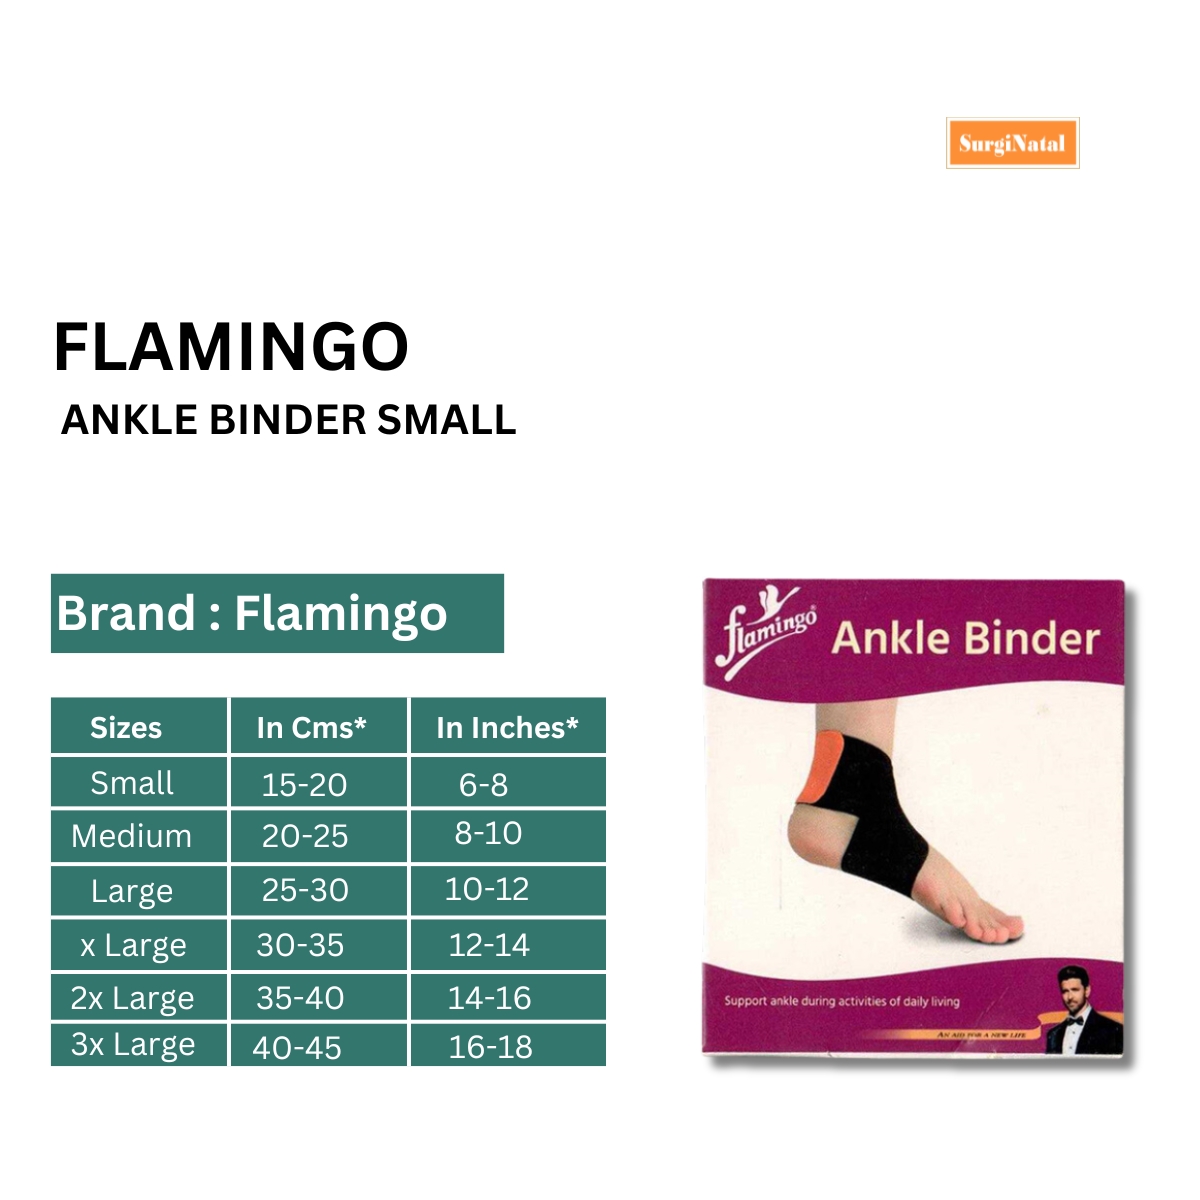 flamingo ankle binder small